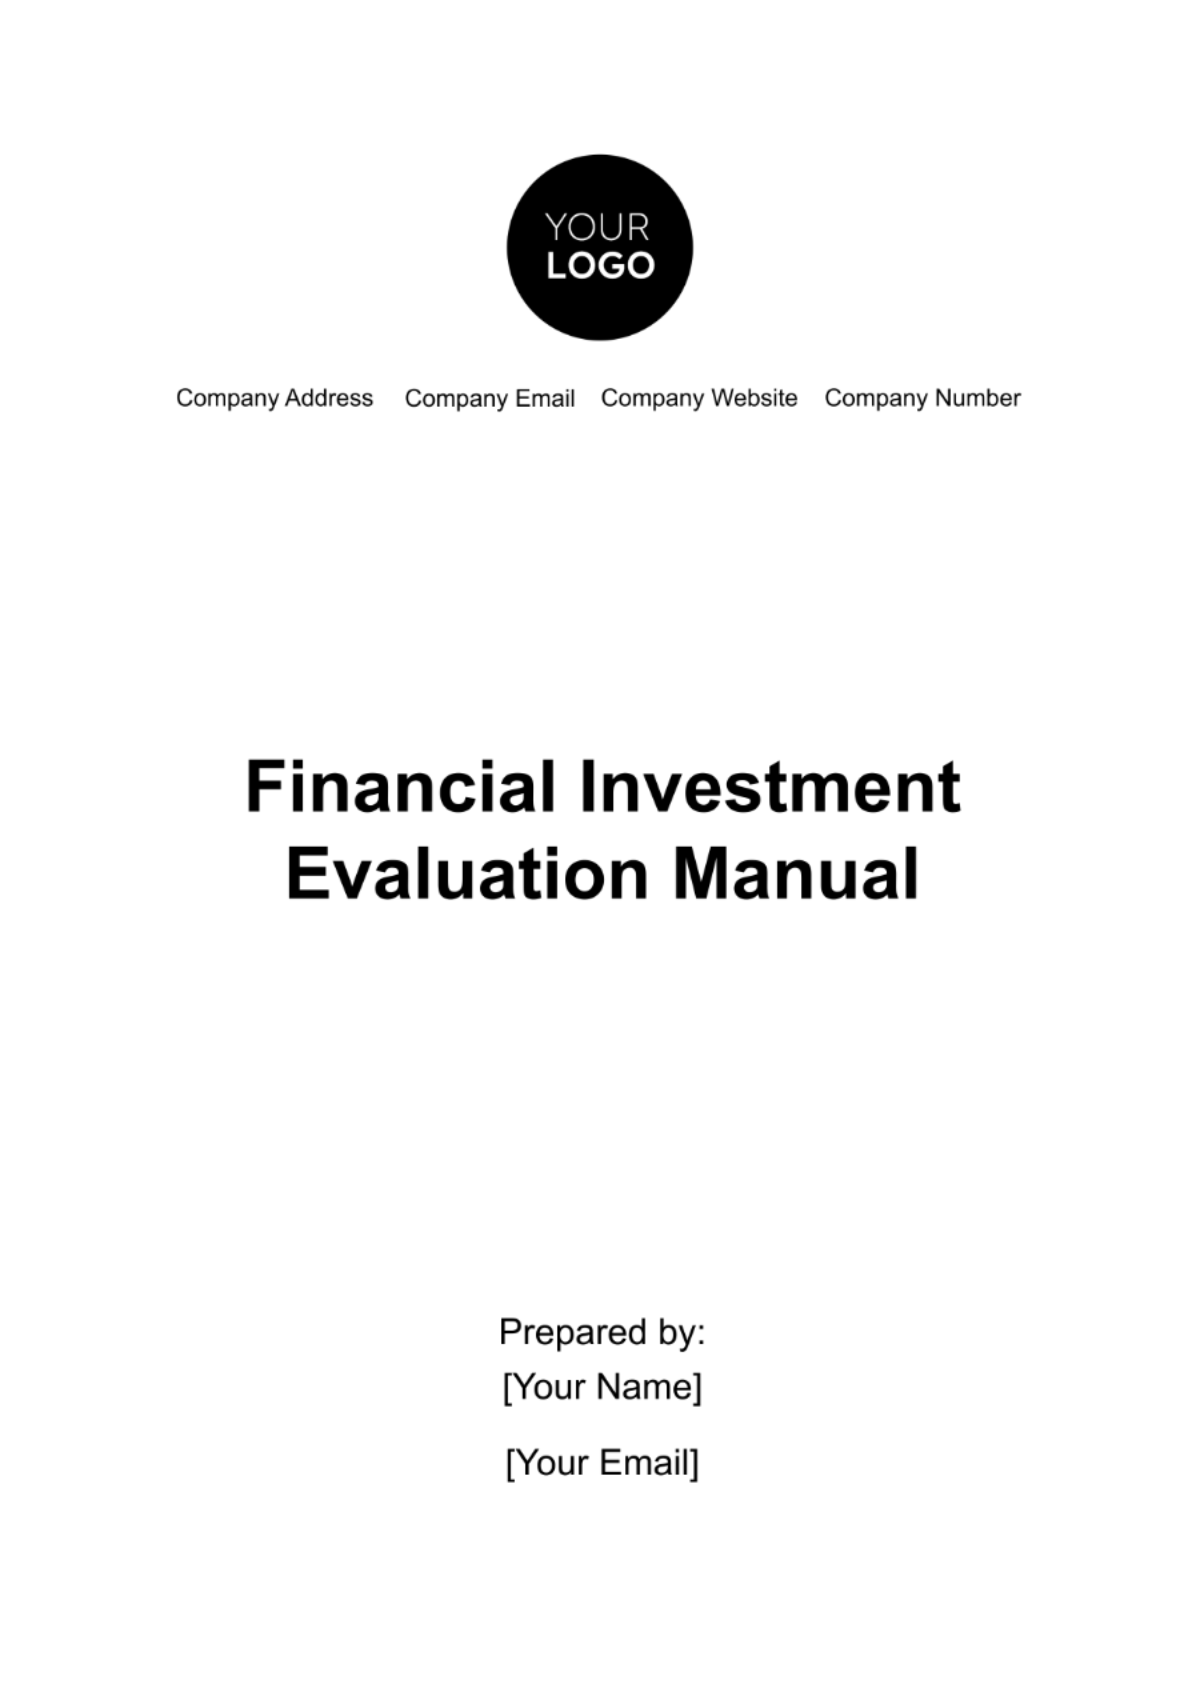 Financial Investment Evaluation Manual Template